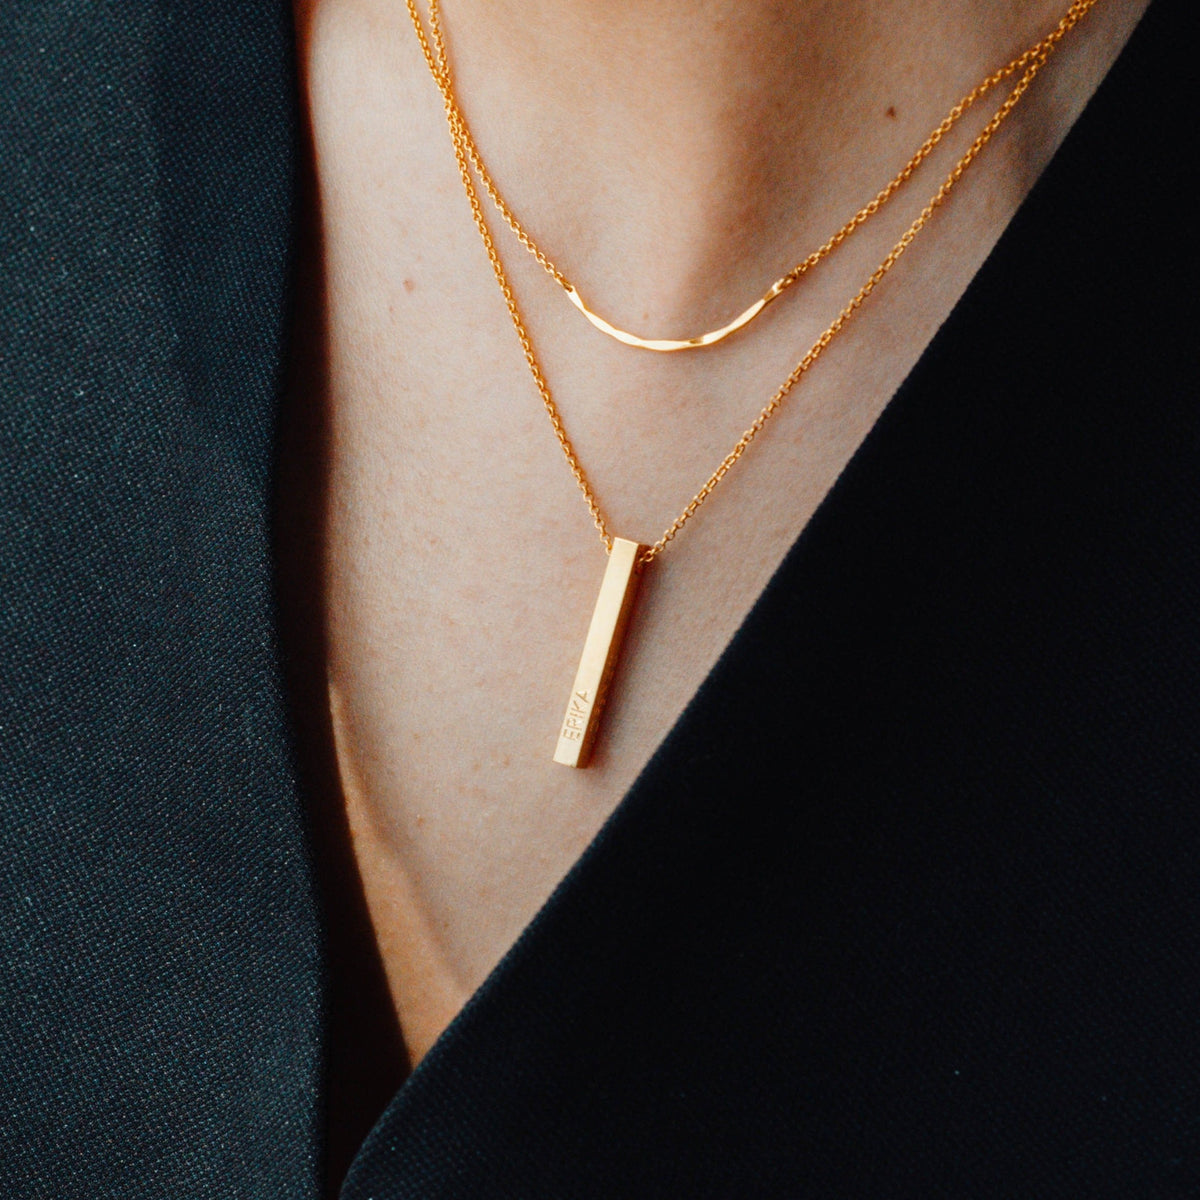 Tella Necklace - Solid Gold